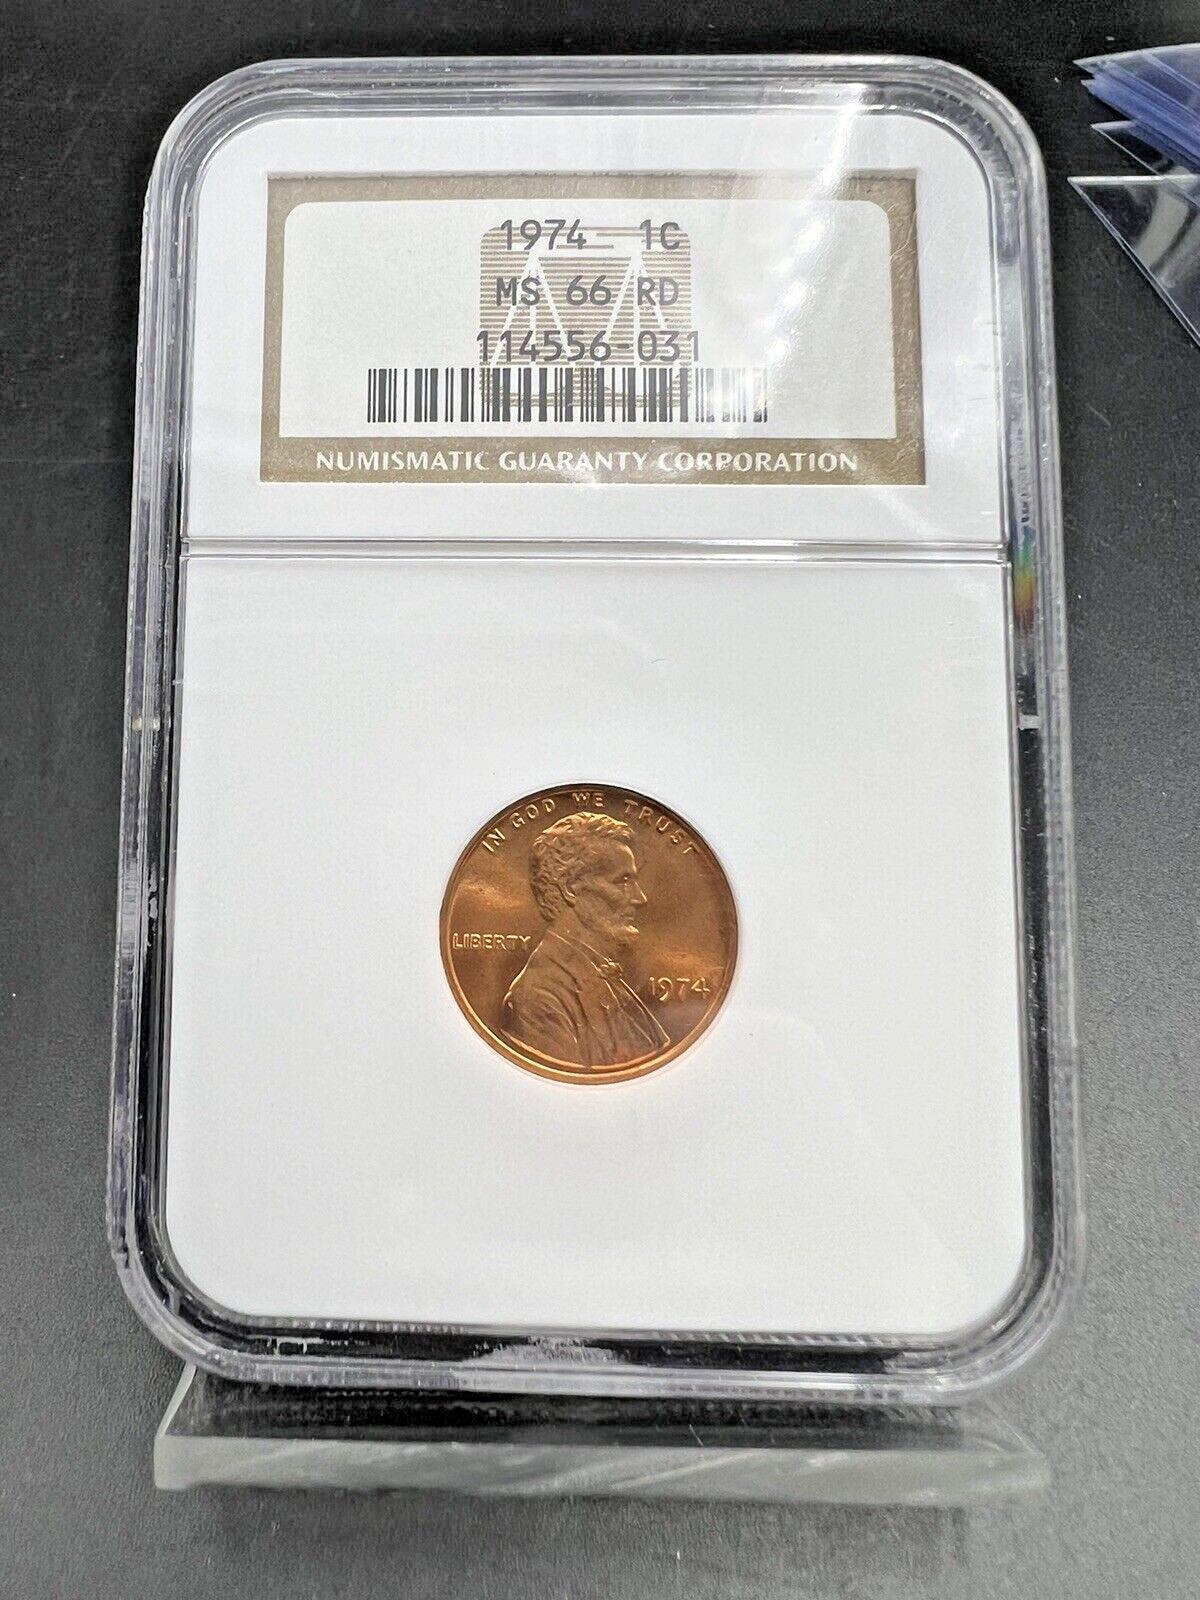 1974 P Lincoln Memorial Cent Penny Coin NGC MS66 RD Gem BU Certified #3